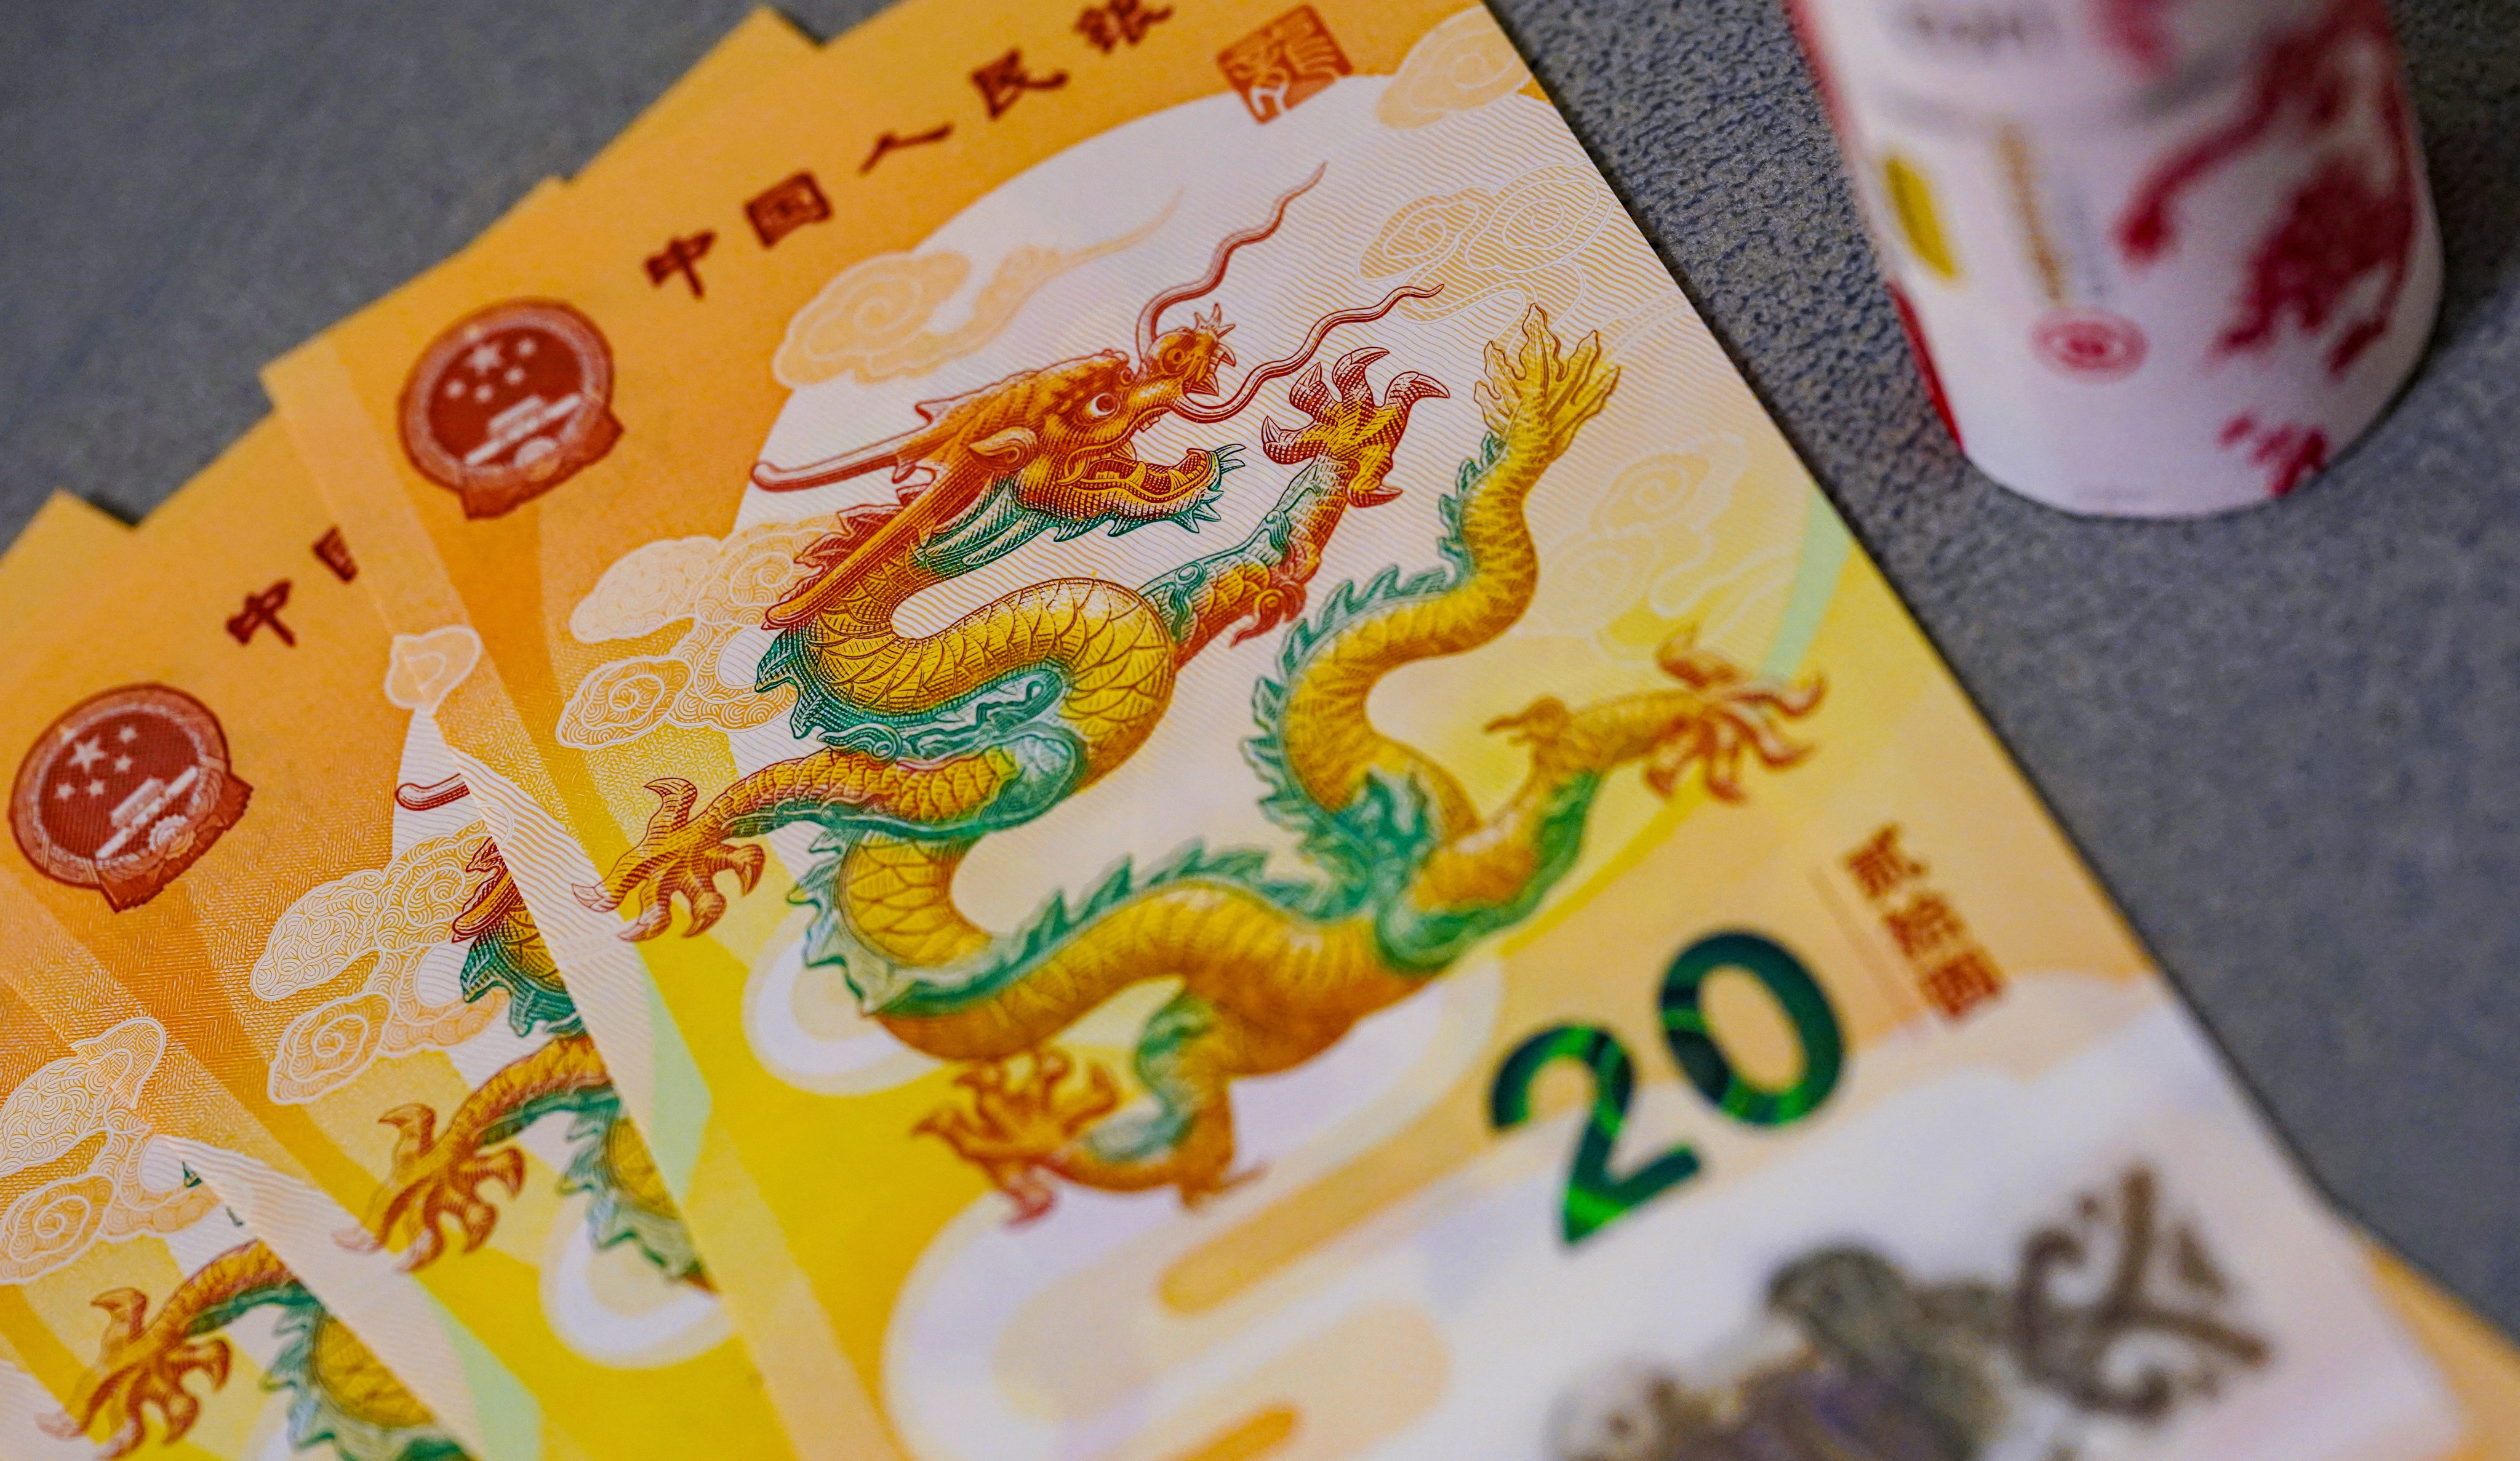 The People’s Bank of China unveiled a set of special gold, silver and copper alloy coins in December, alongside a 20-yuan banknote, to usher in the year of the dragon. Photo: Weibo